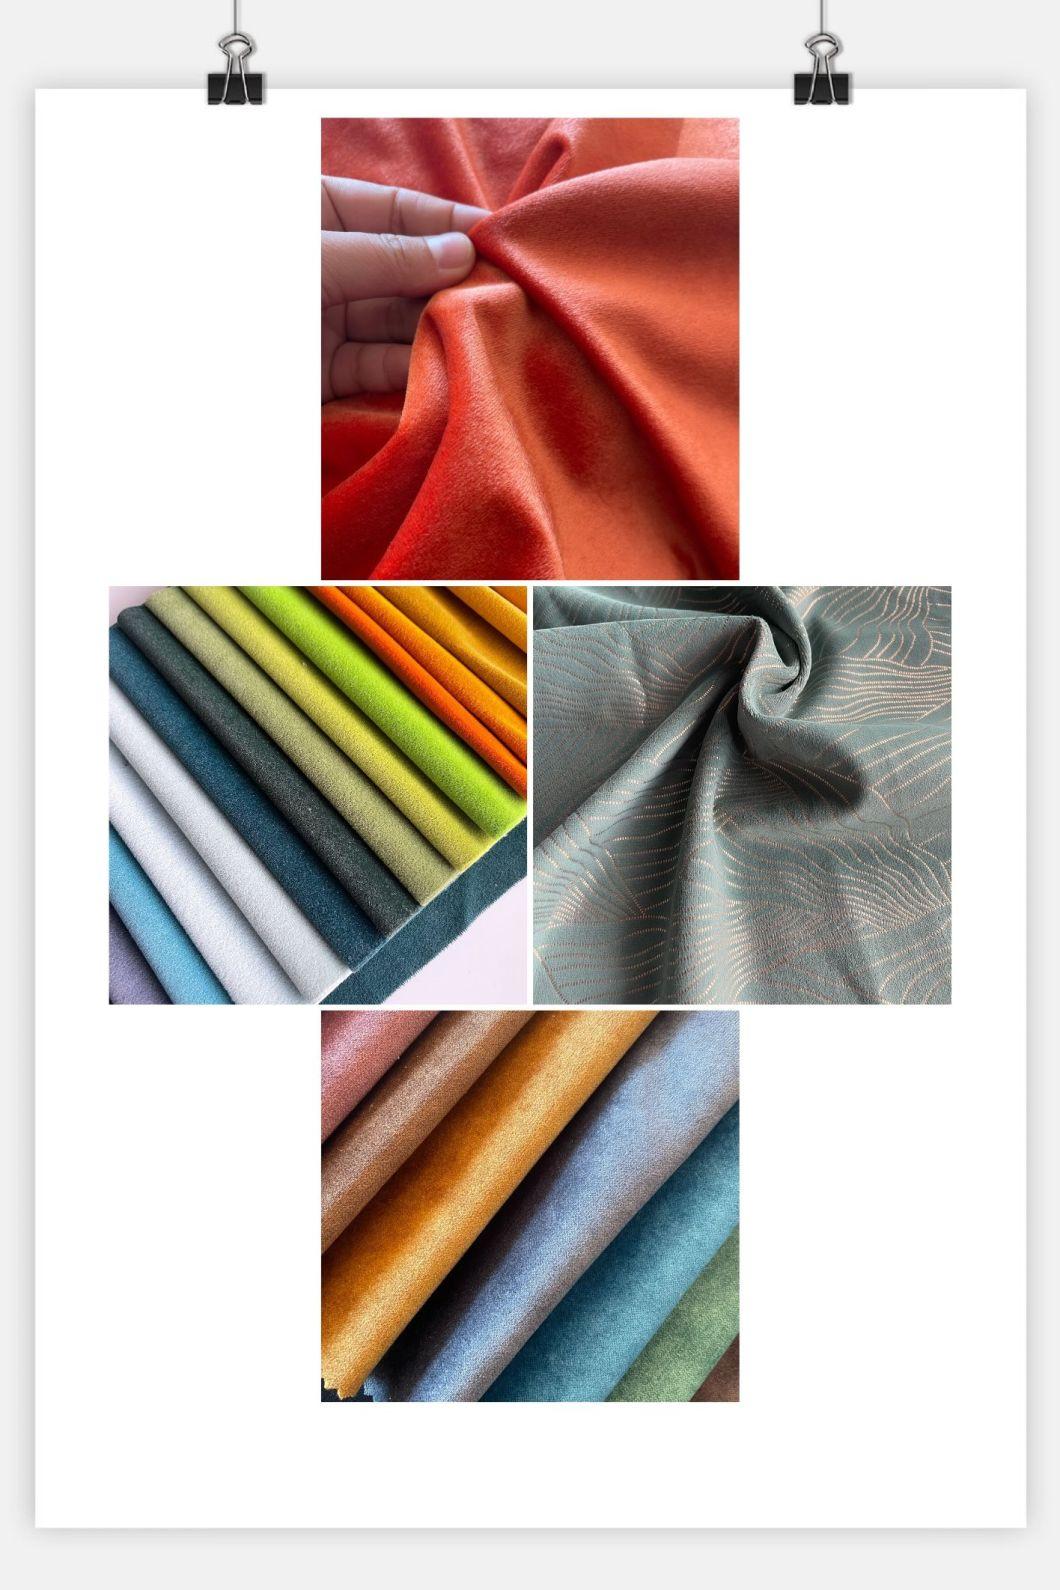 China Ready Goods Tela 1-2USD Two Tones Fleece Linen Polyester Woven Sofa Fabric for Couch Furniture Chair Upholstery Cloth Decorative Material (JX001)